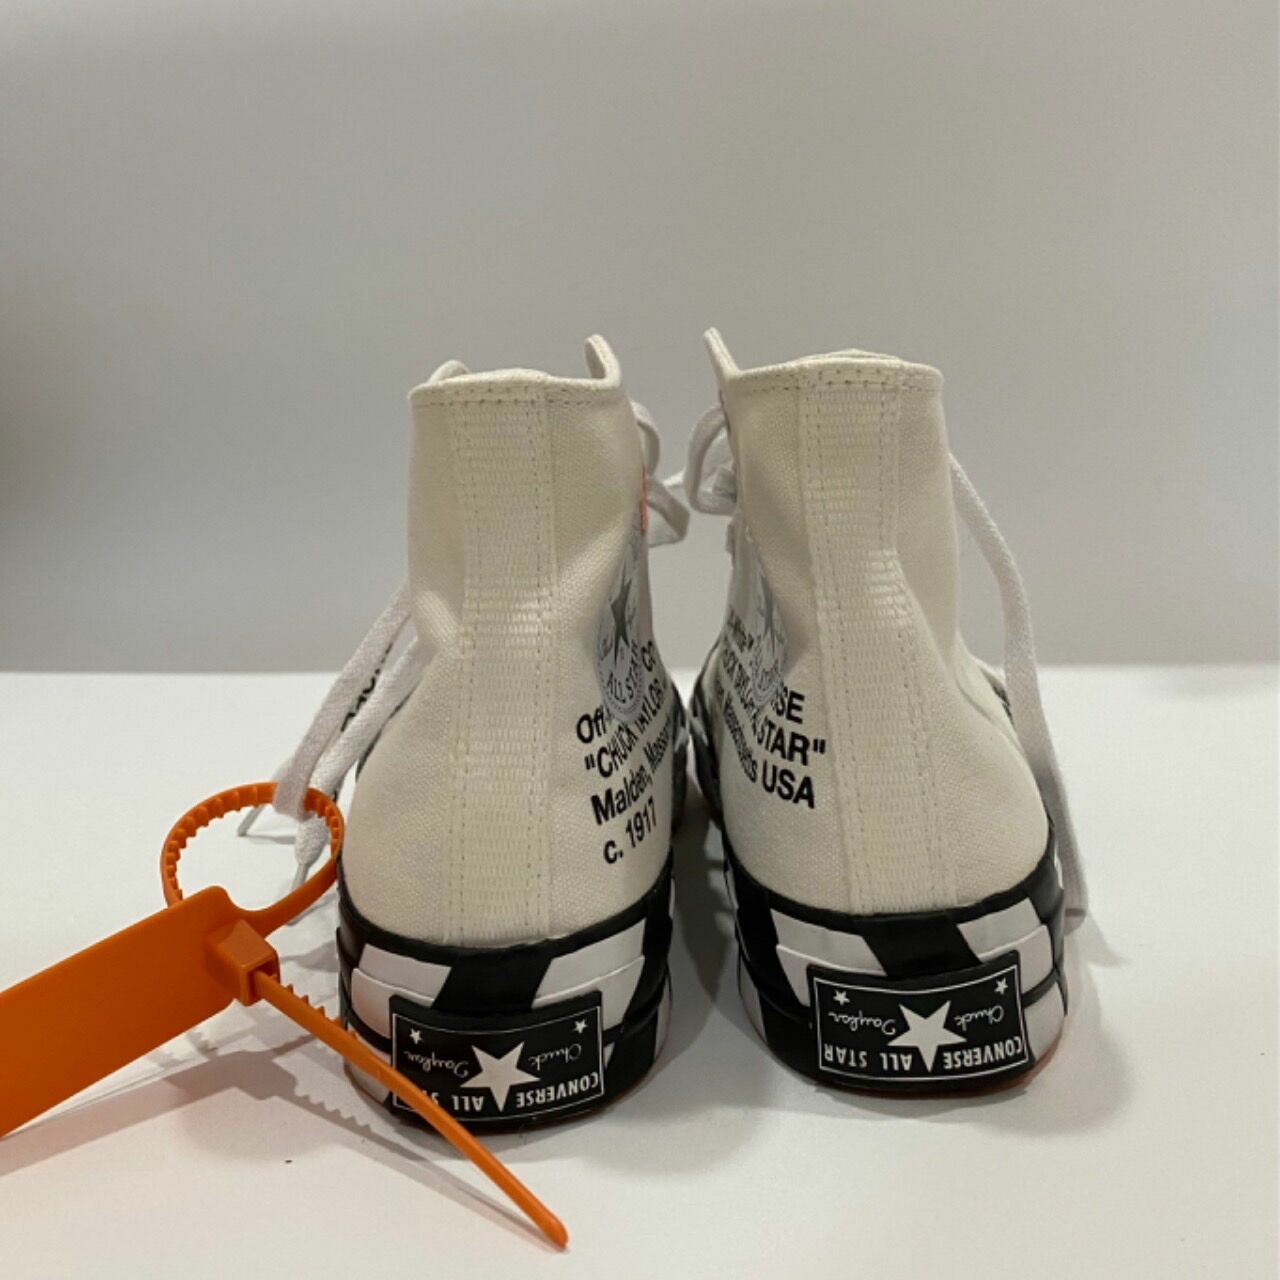 Off-White x Converse Shoes